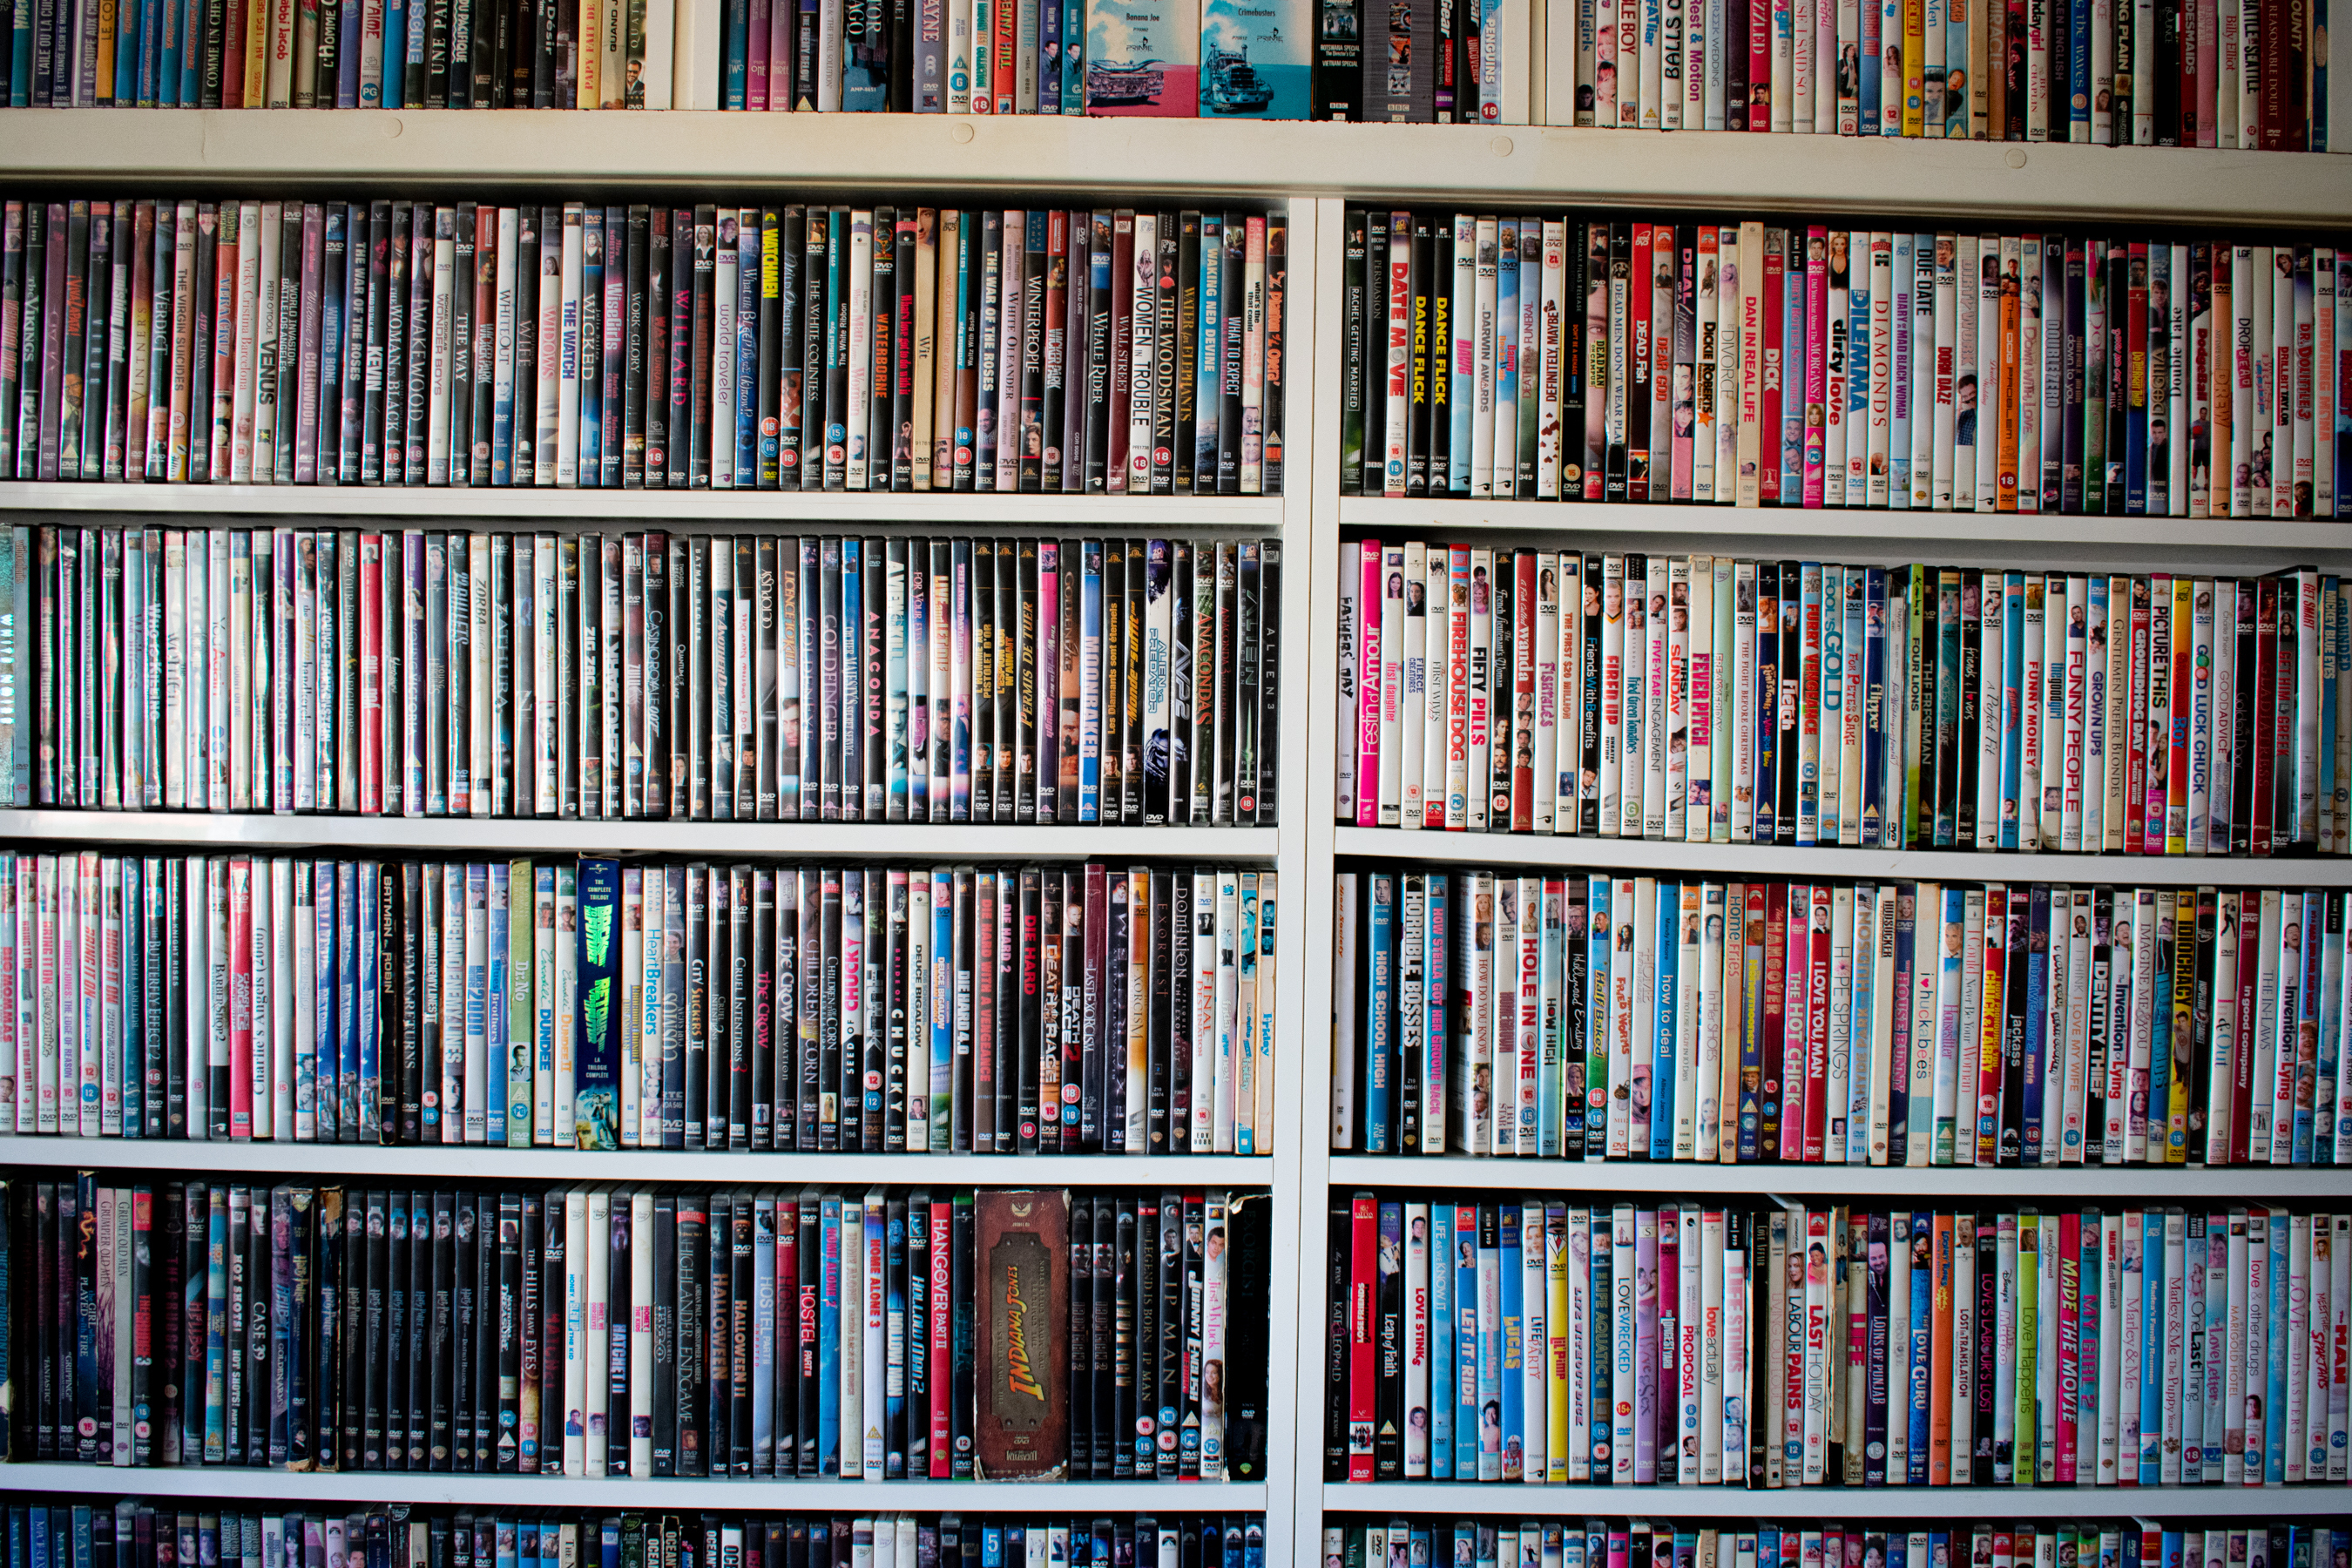 Shelves filled with an extensive collection of DVDs and Blu-rays